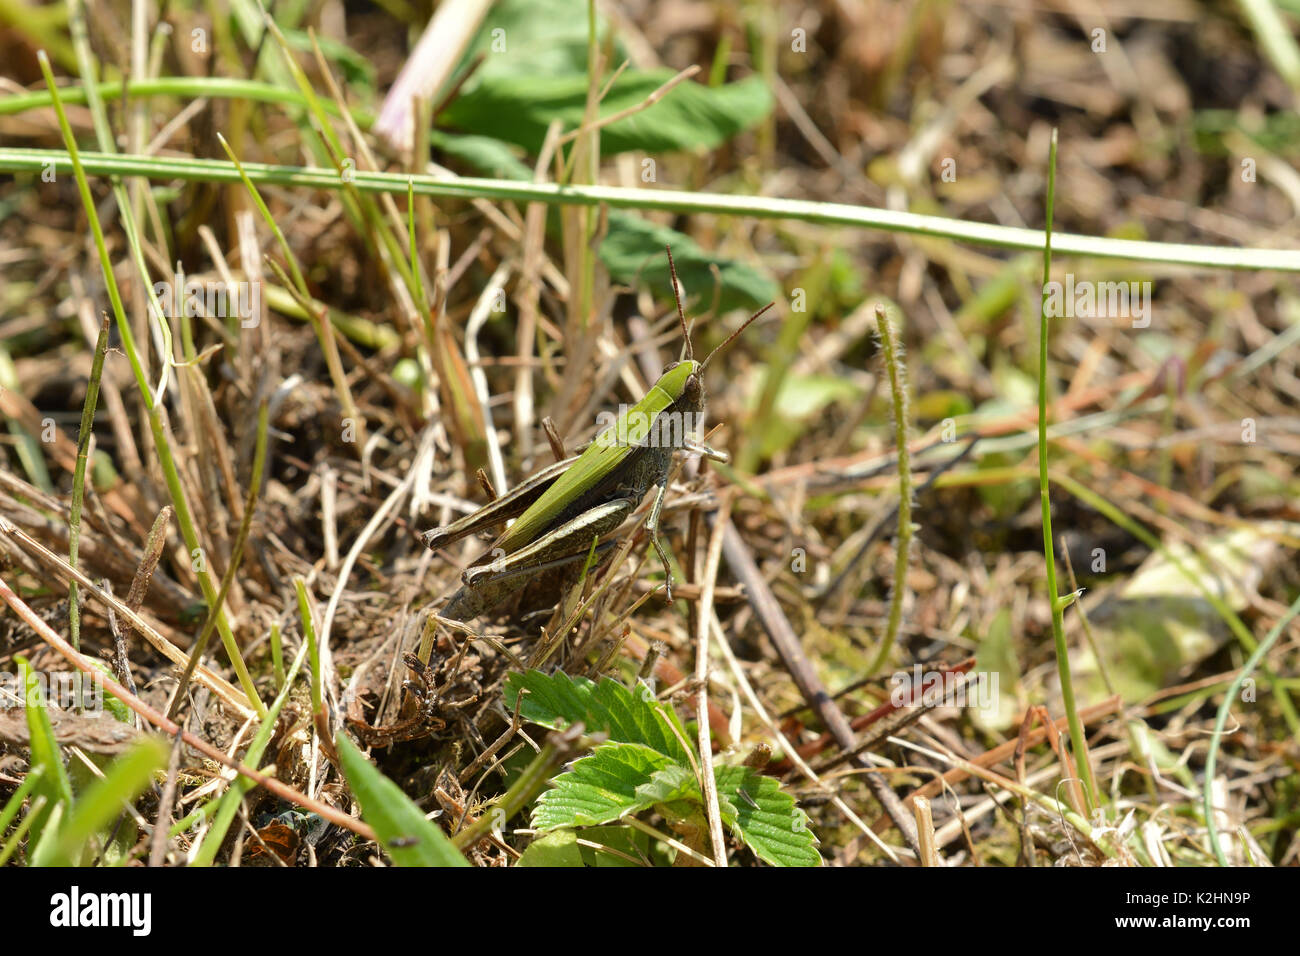 insect Grasshopper hidden on the grass Stock Photo